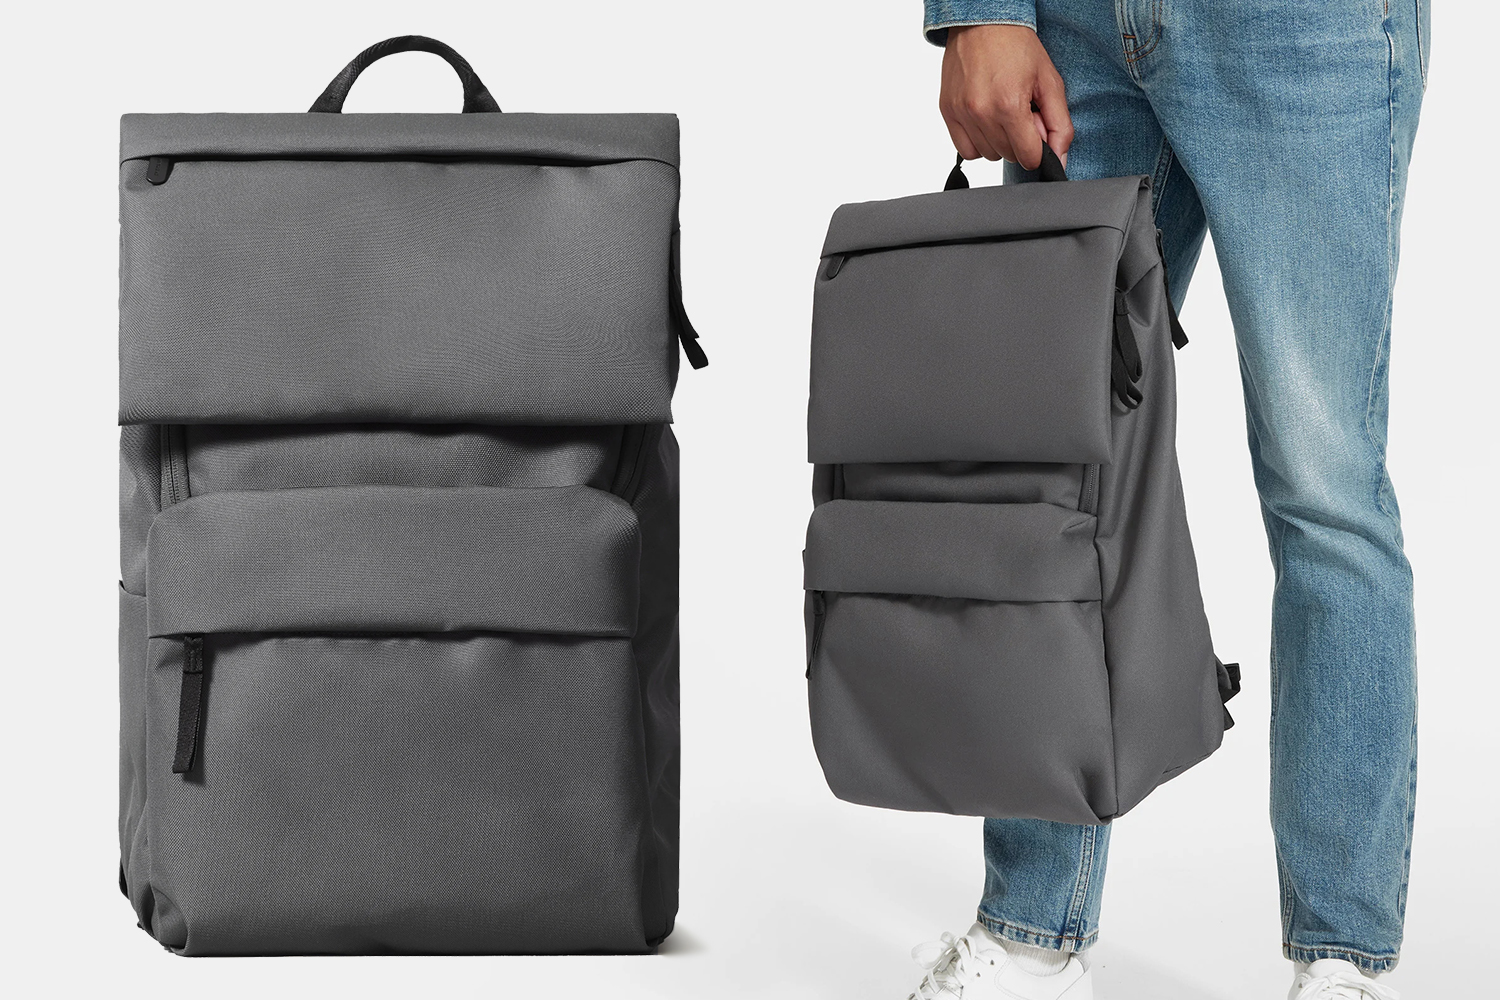 Is Everlane's ReNew Transit Backpack an Ideal Carry-On? - InsideHook